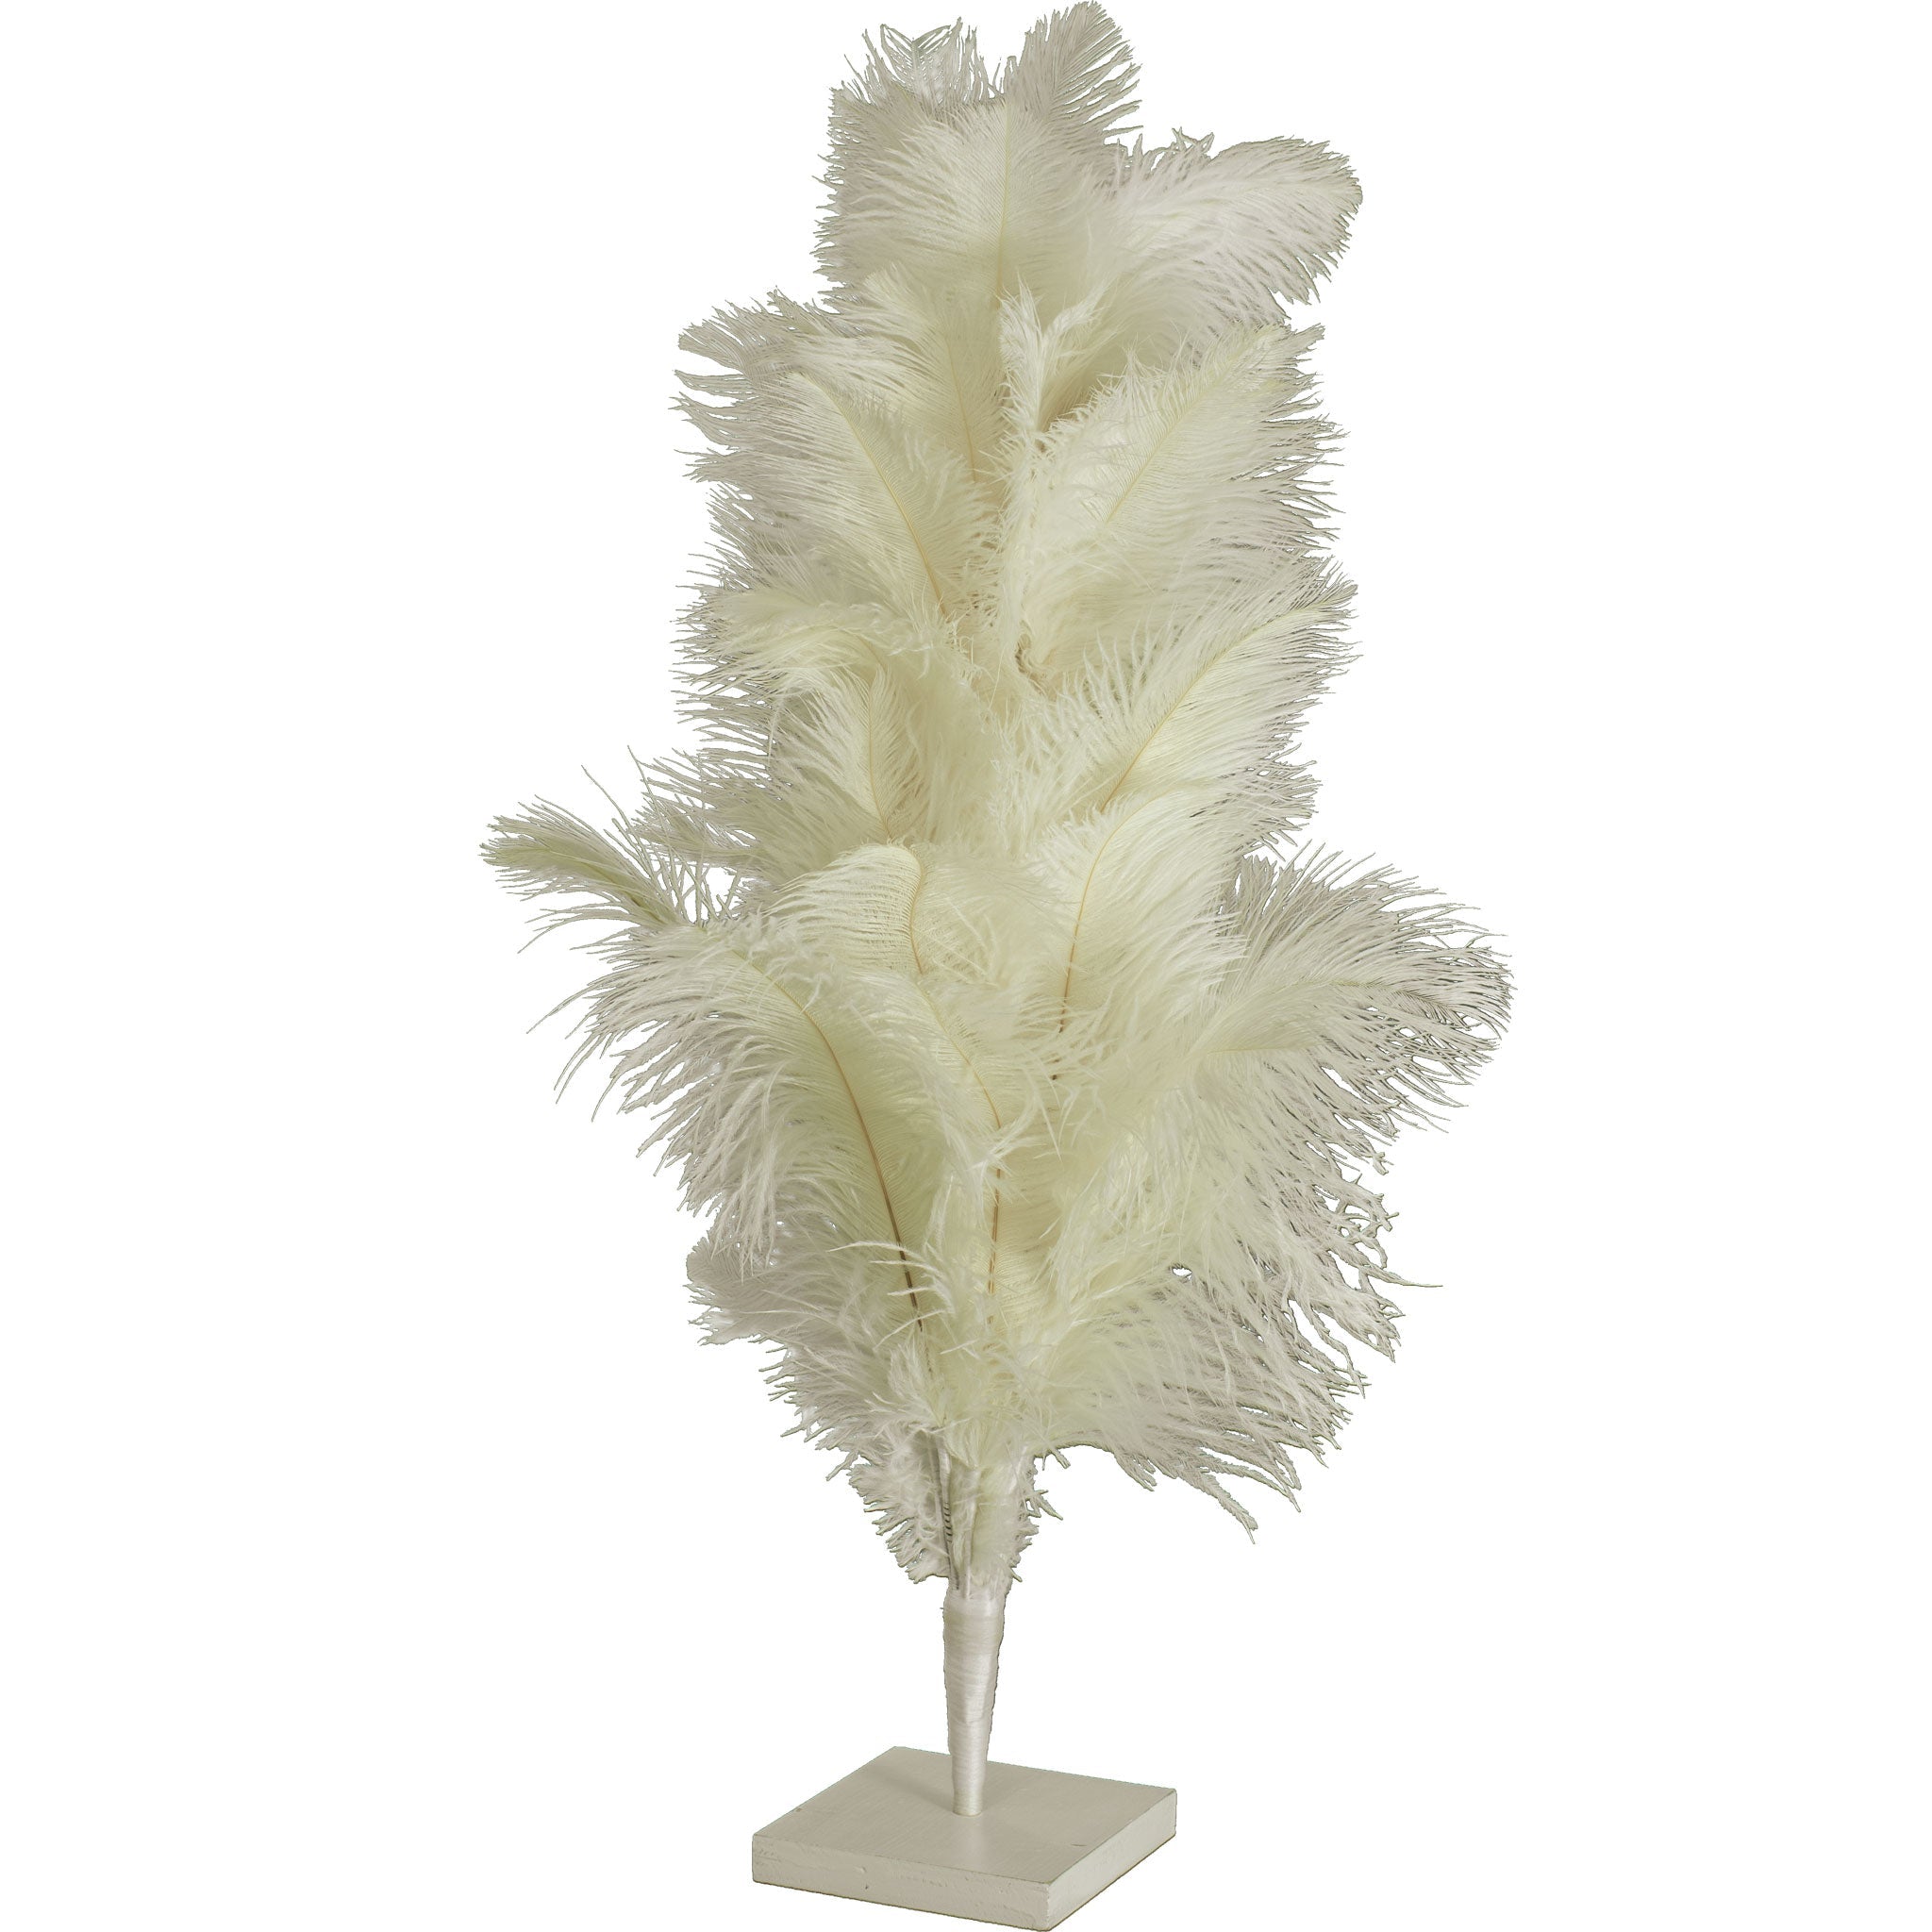  3FT White Christmas Tree Real White Ostrich Feather Branches  with Metal Stand Included Indoor Outdoor : Home & Kitchen